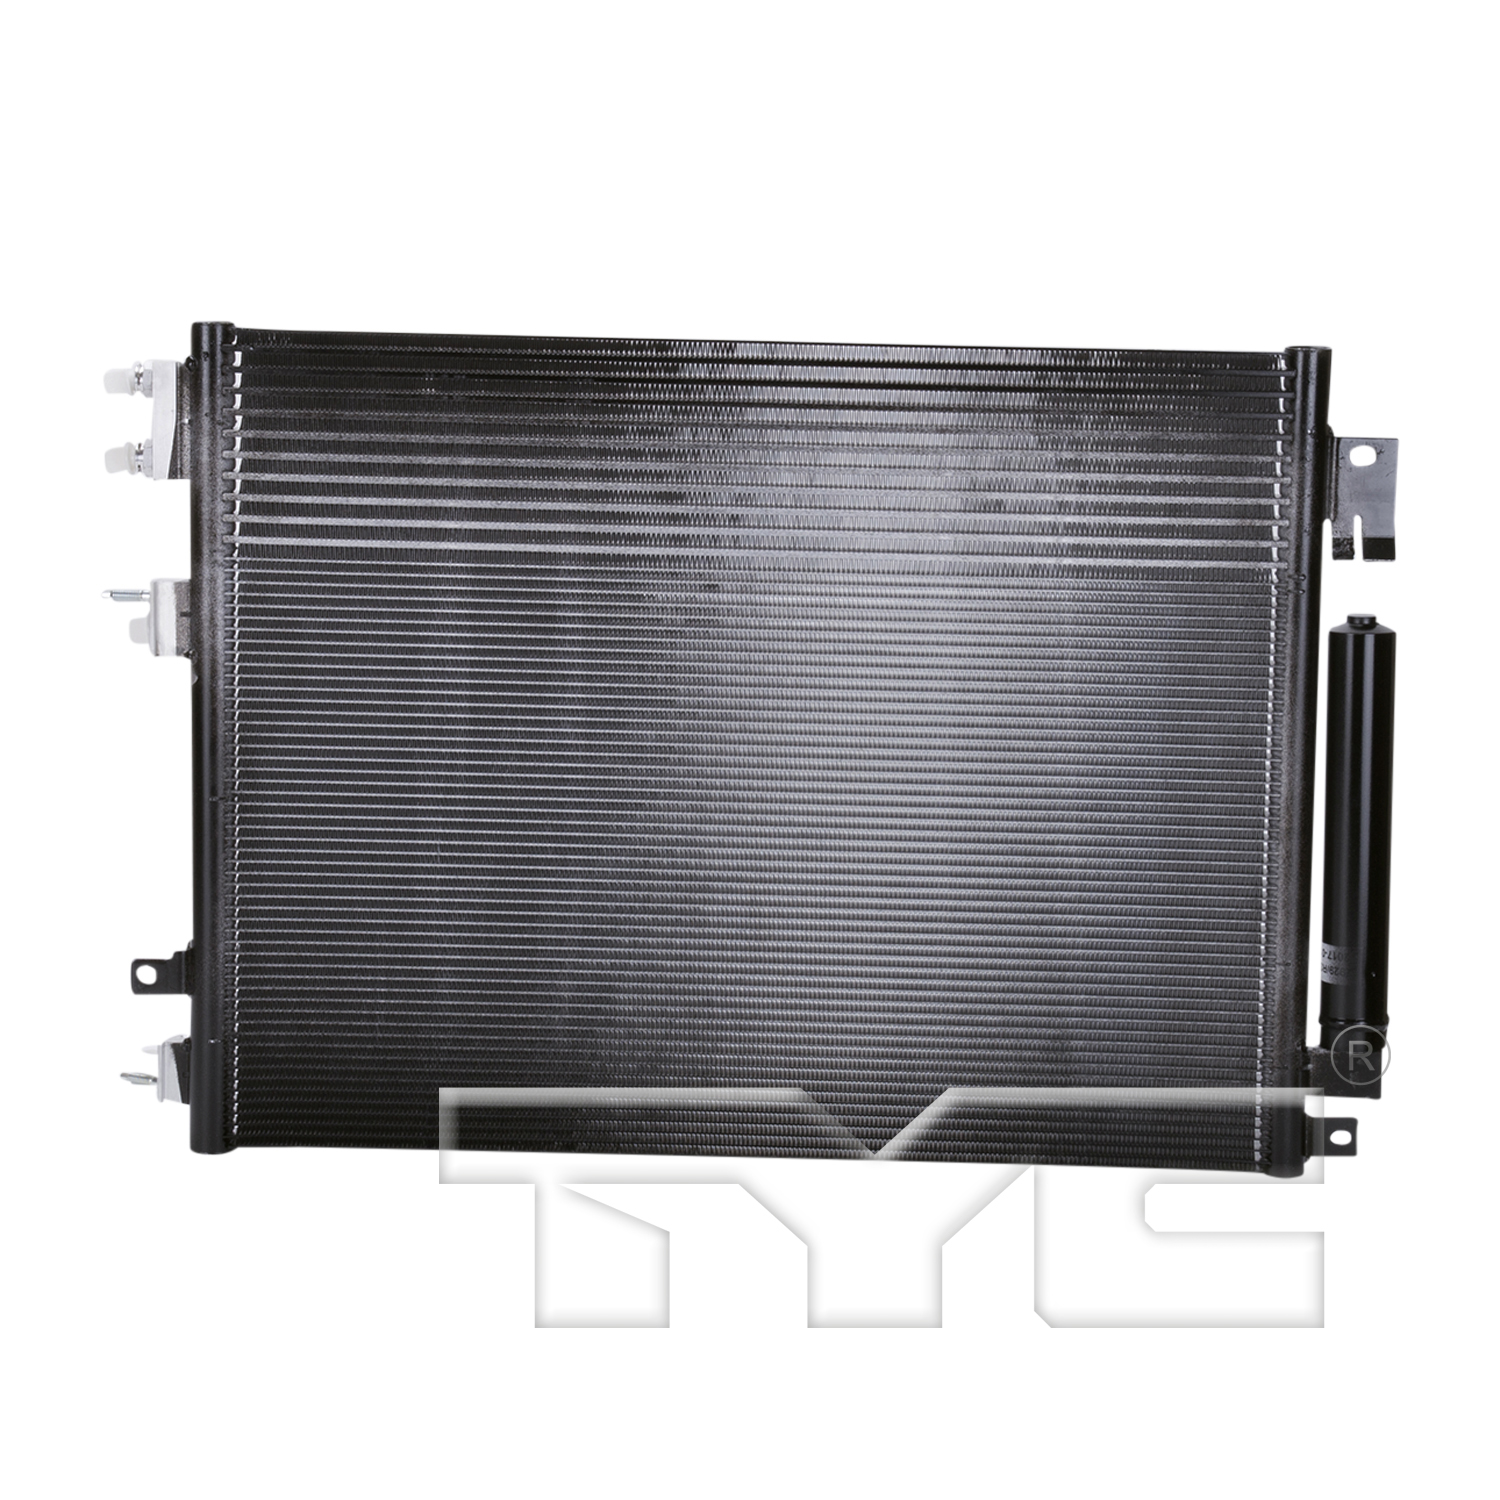 Aftermarket AC CONDENSERS for CHRYSLER - 300, 300,11-22,Air conditioning condenser